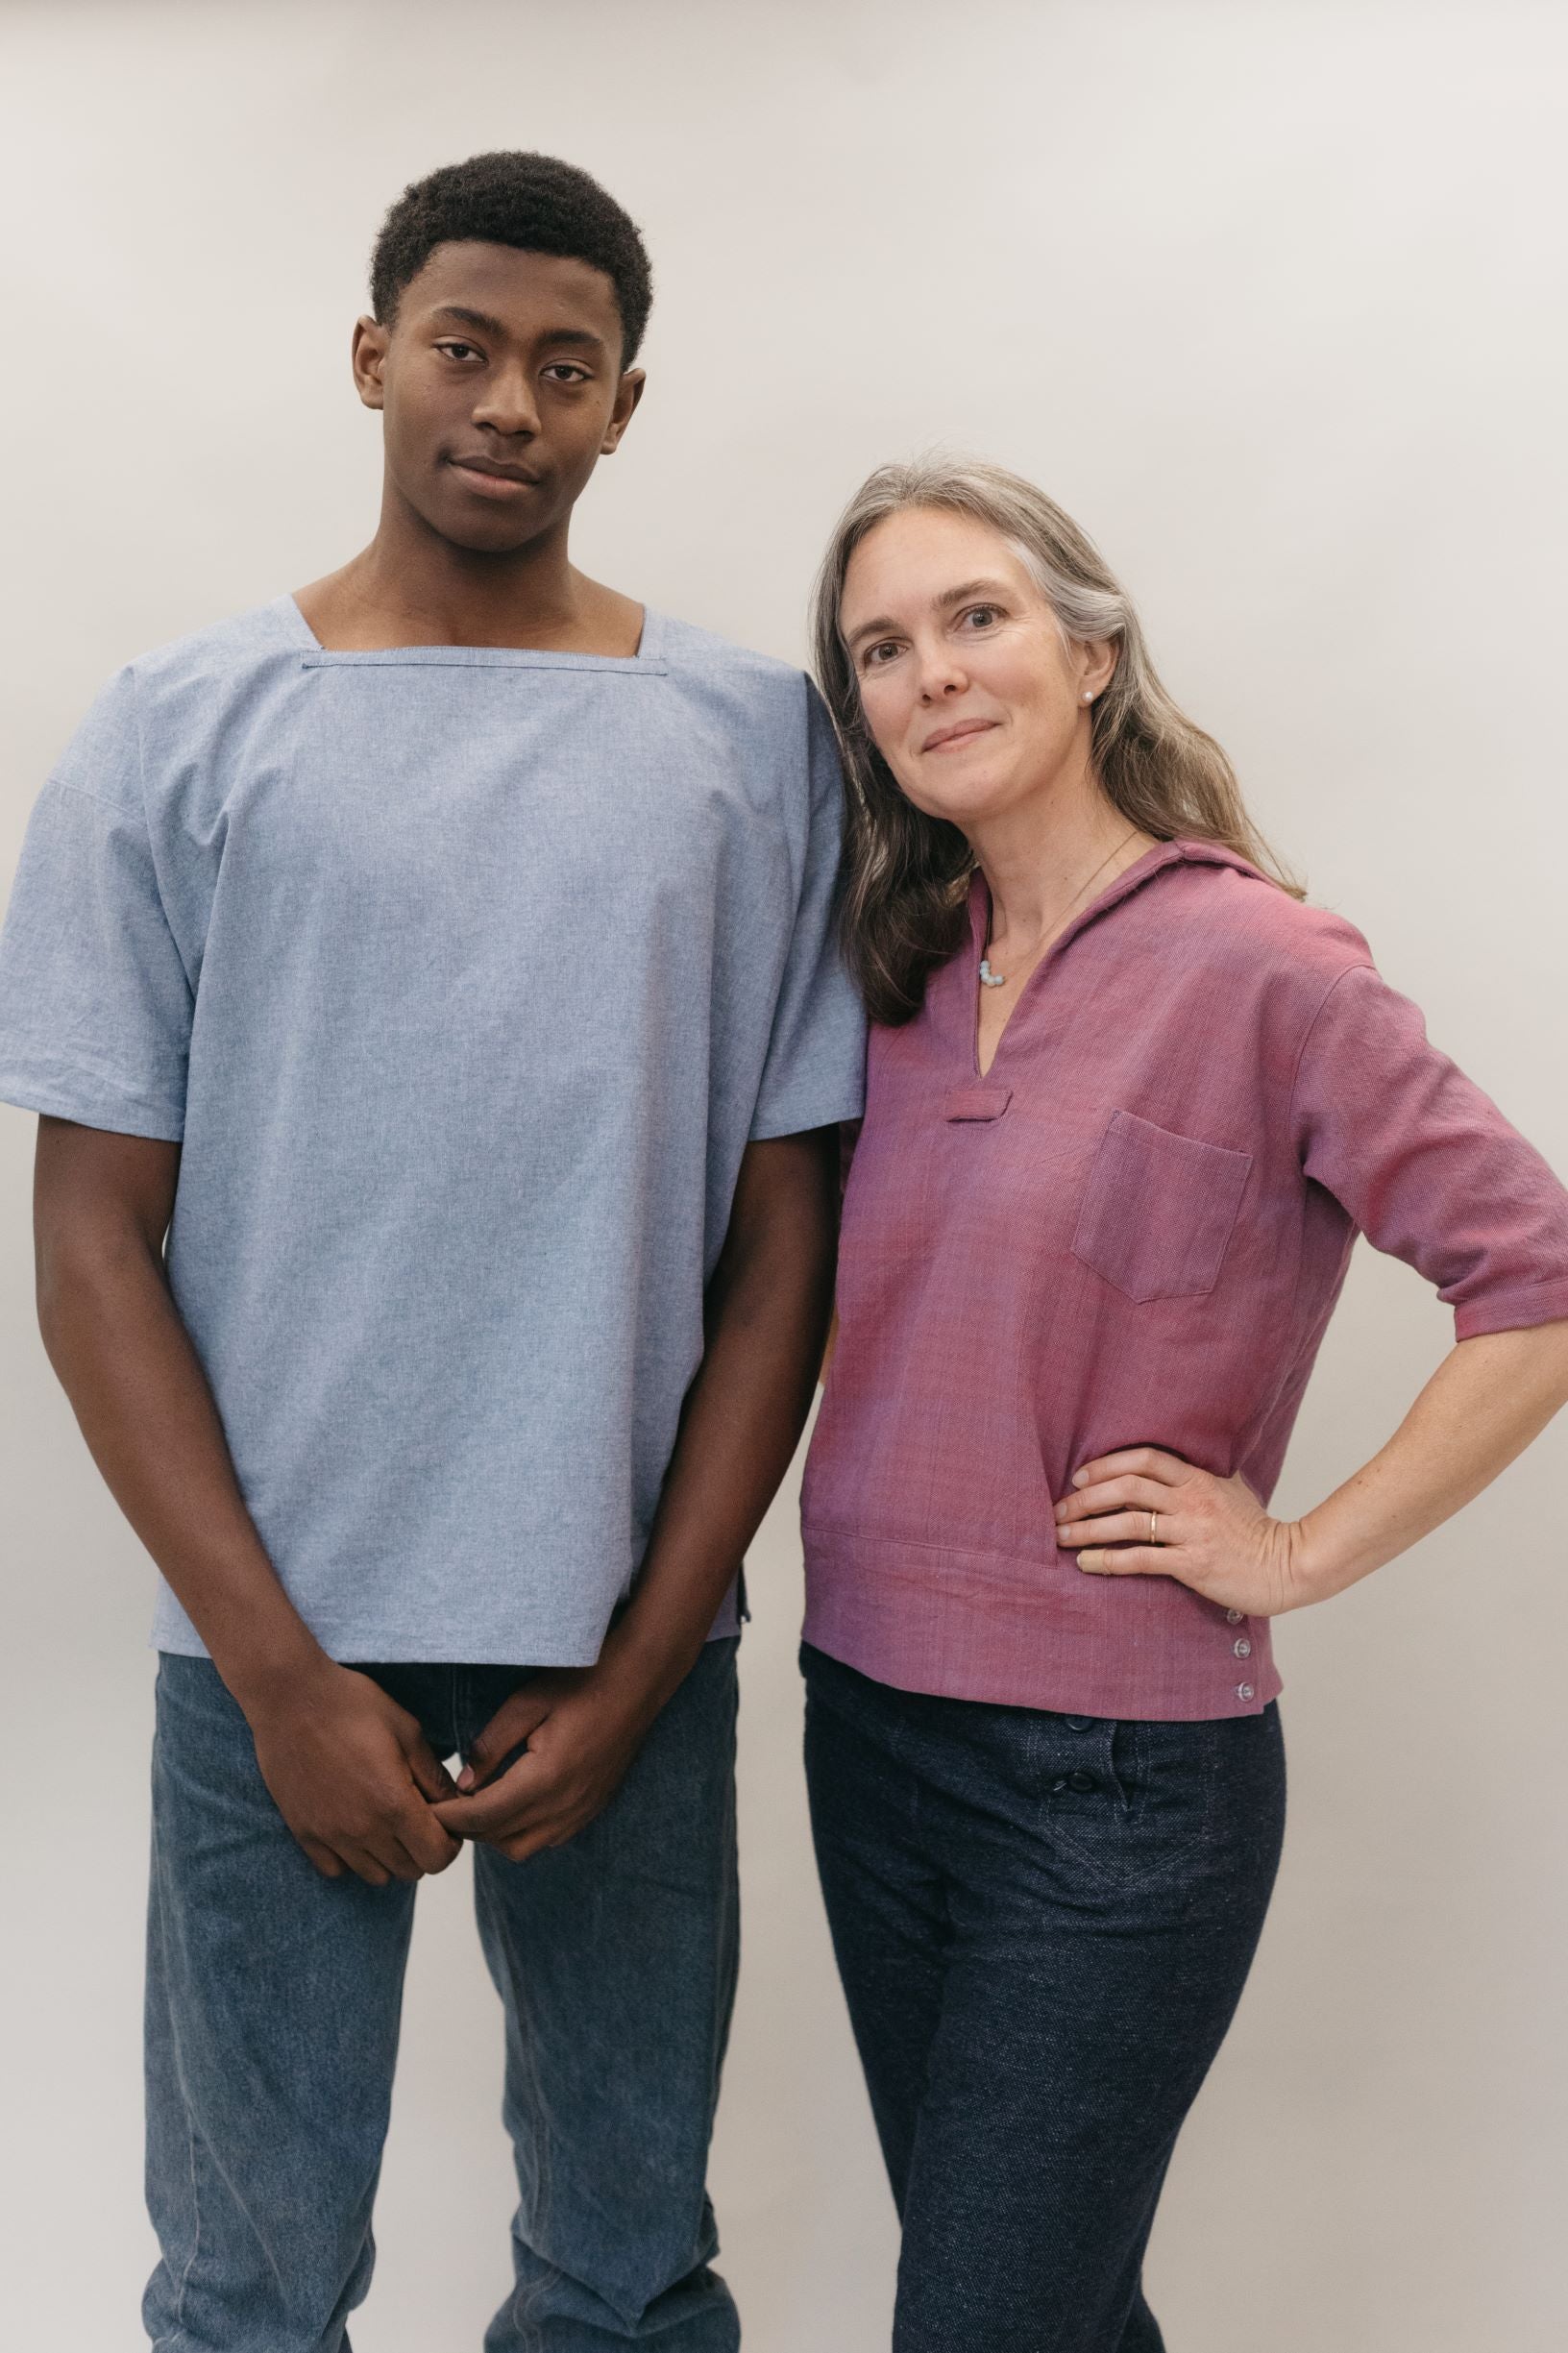 A young African American man and a white woman standing in front of a studio white backdrop wearing 211 Two middies, one with a square neck the other with a v-neck.